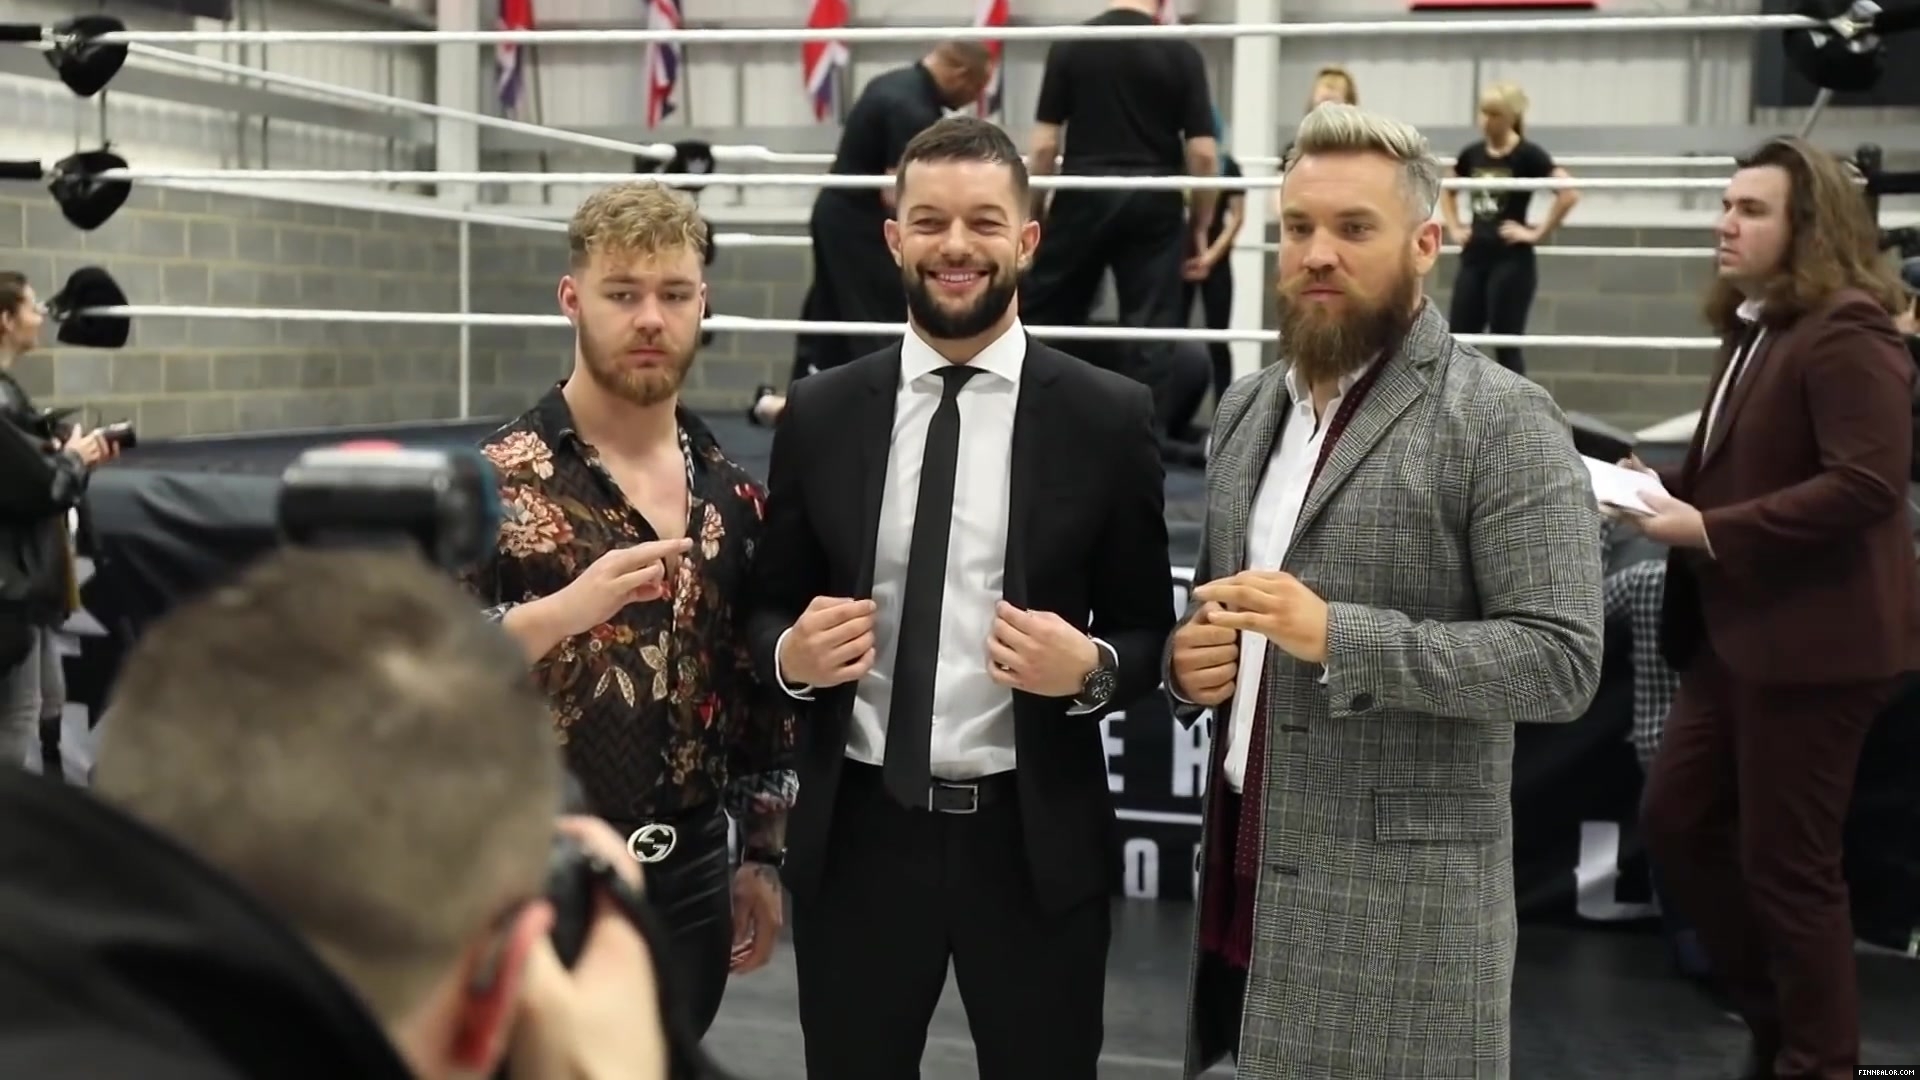 WWE_Superstar_FINN_BALOR_joins_MOUSTACHE_MOUNTAIN_at_the_opening_of_the_NXT_UK_PC_040.jpg